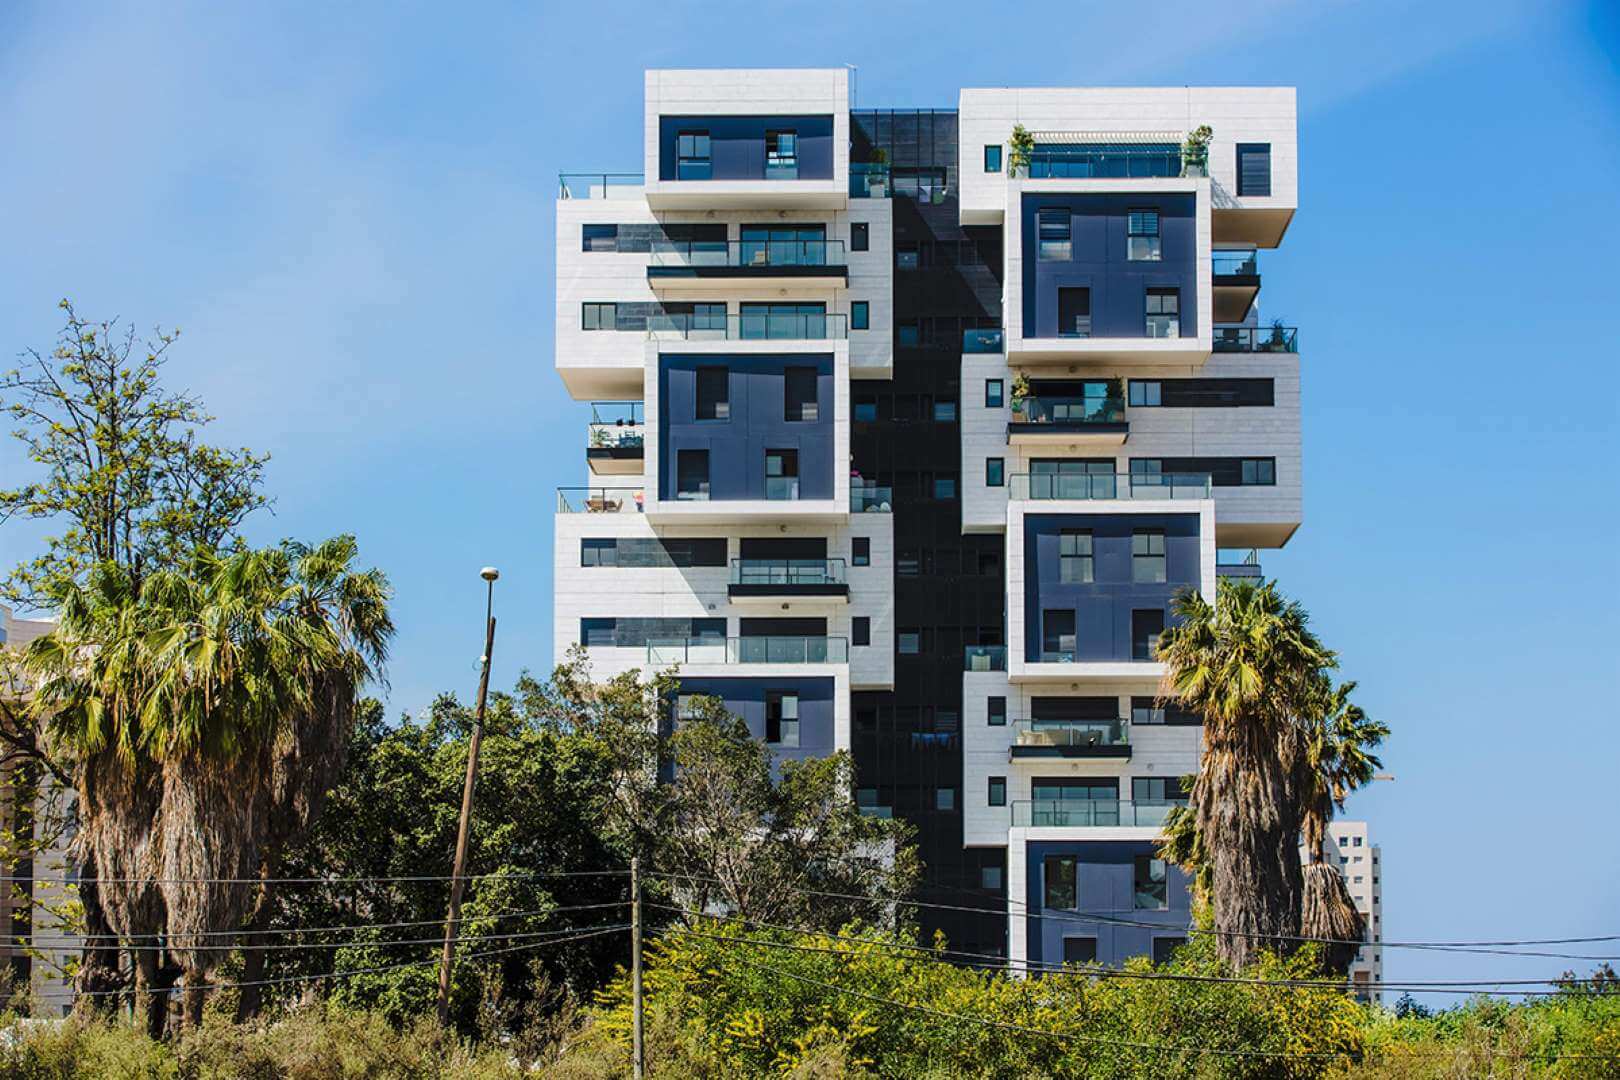 Photograph of a residential building from the BE UNIK project in Ramat Hasharon